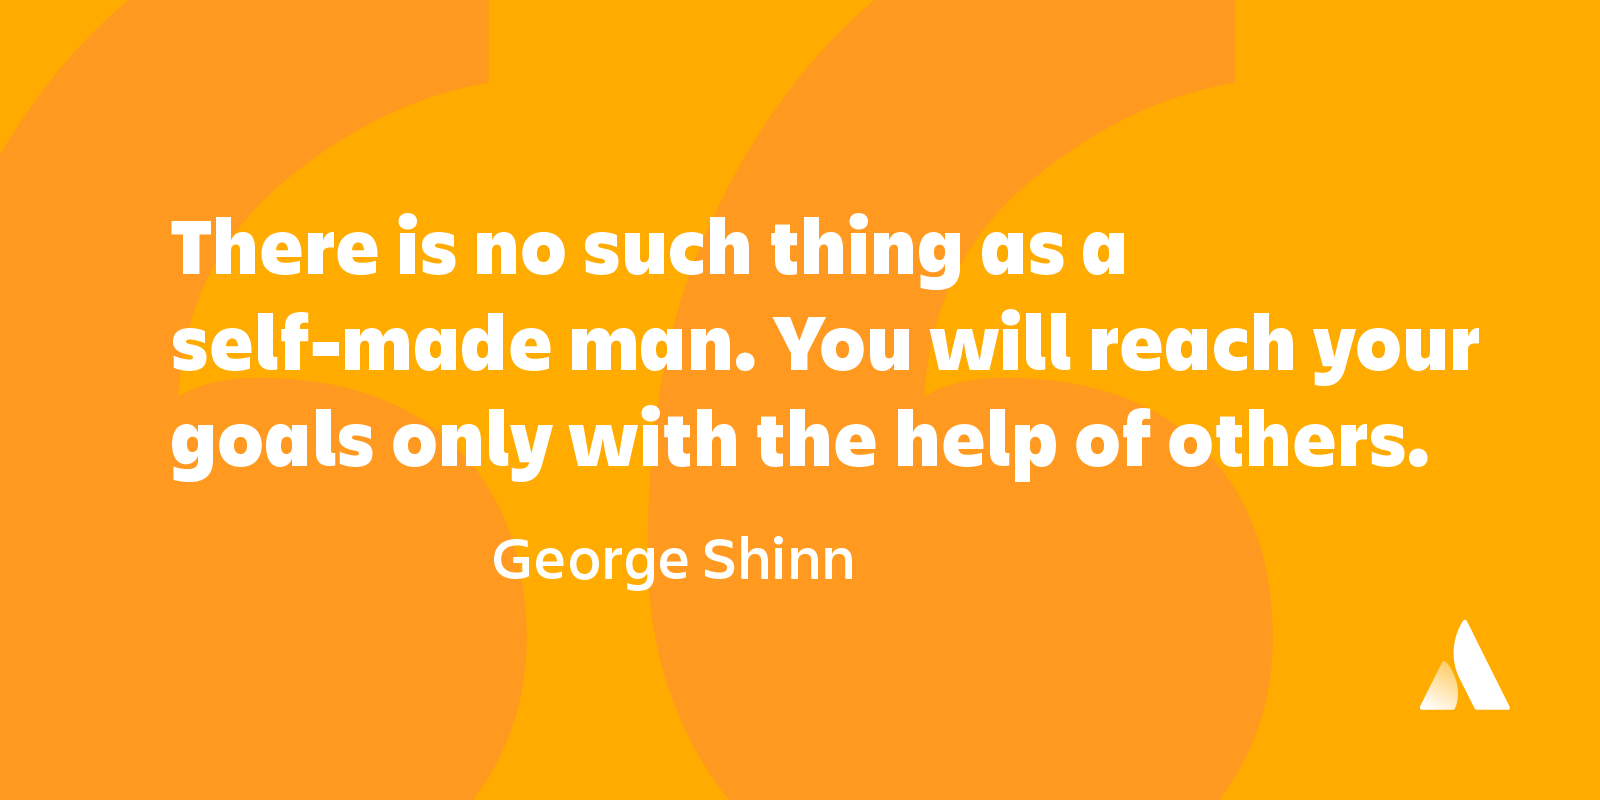 there is no such thing as a self-made man. you will reach your goals only with the help of others. george shinn